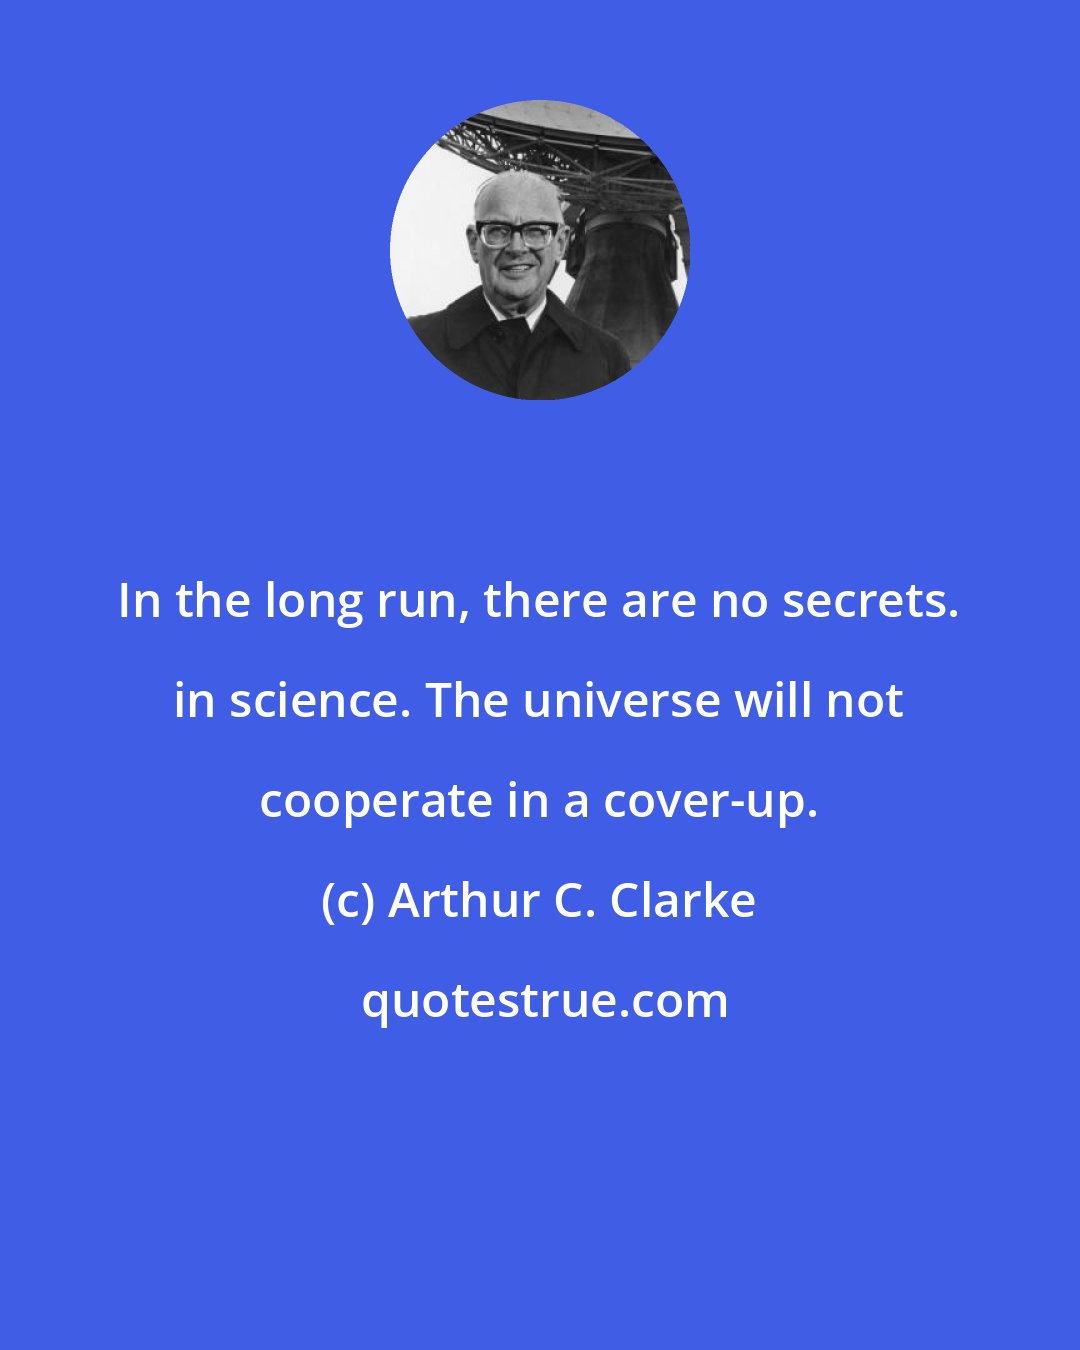 Arthur C. Clarke: In the long run, there are no secrets. in science. The universe will not cooperate in a cover-up.